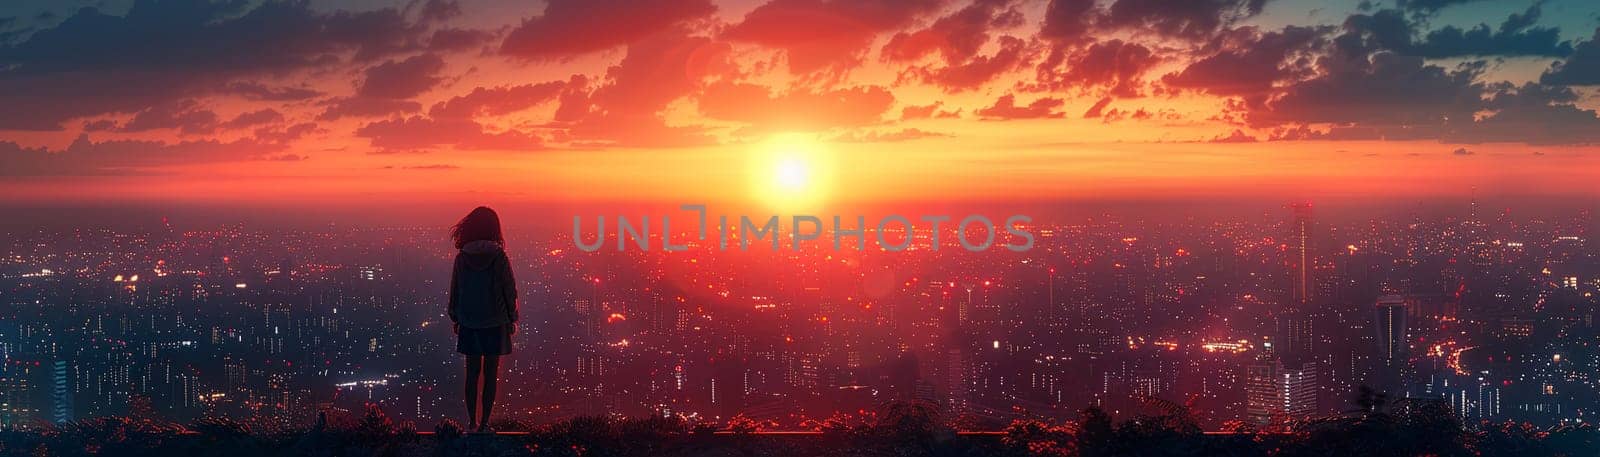 Dreamer's silhouette against a sunset city, the horizon blurring into a realm of possibilities.